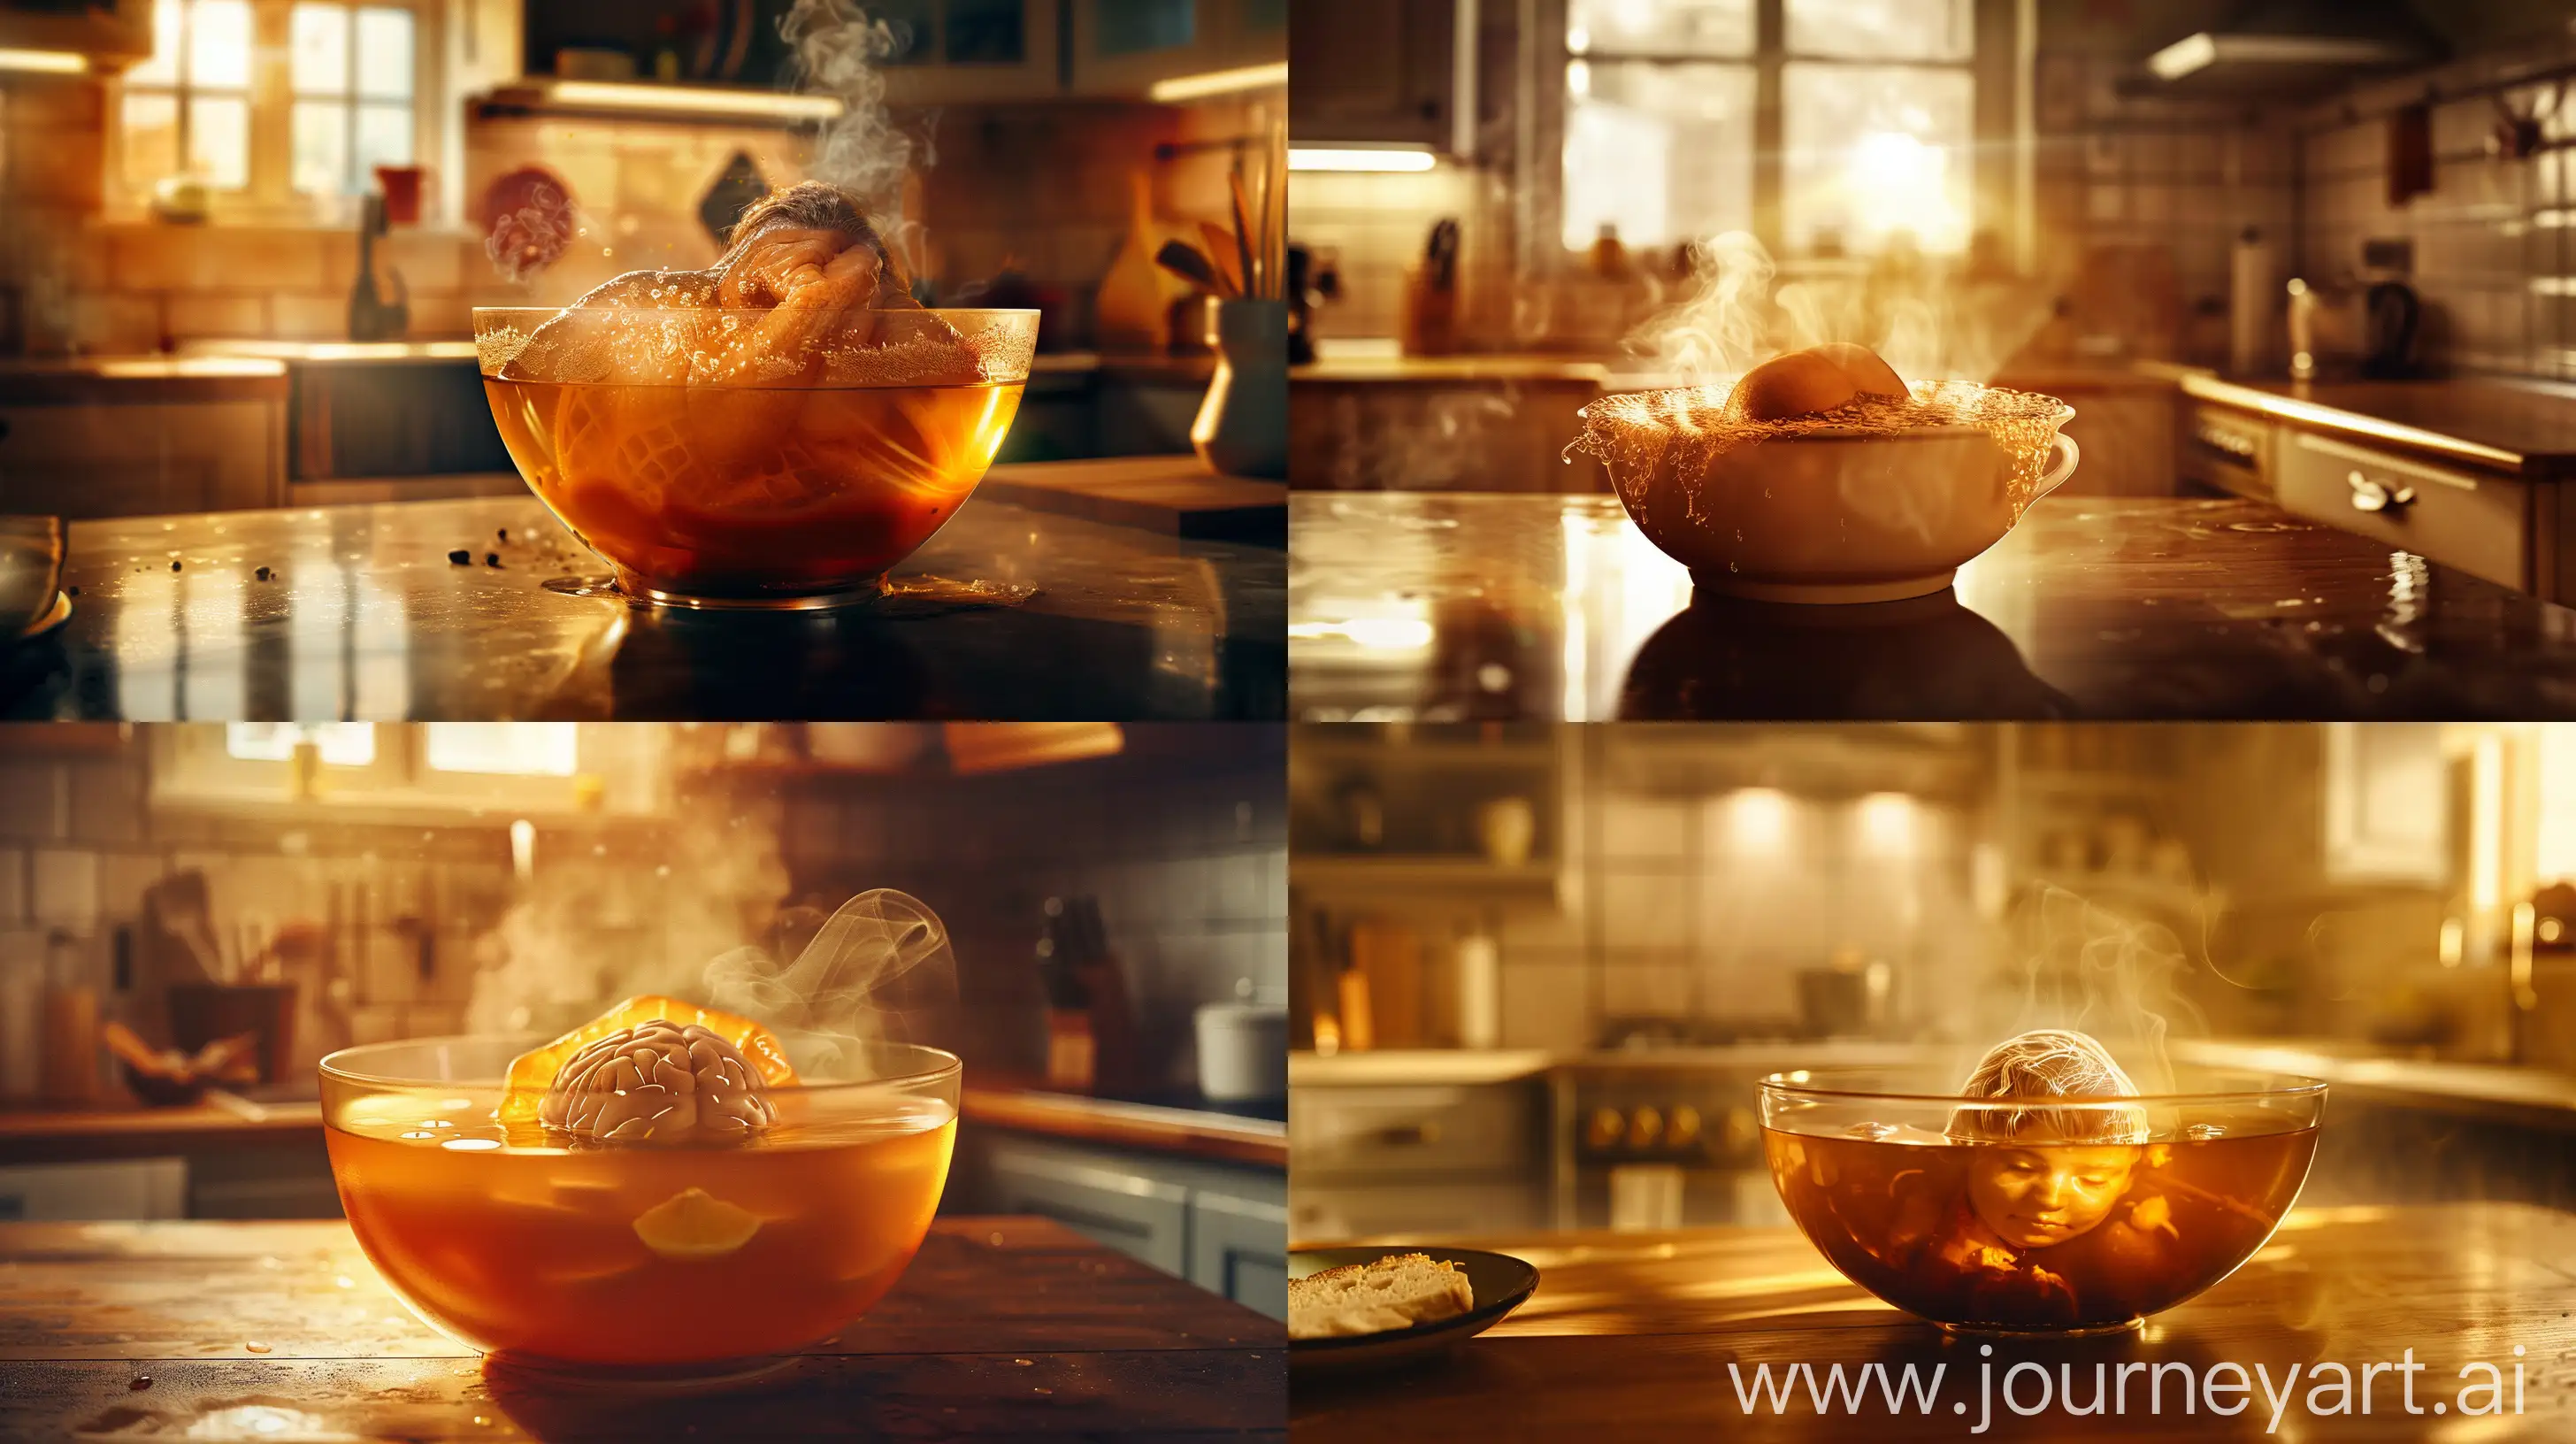 Surreal-Human-Soup-Bath-in-Cozy-Kitchen-Ambiance